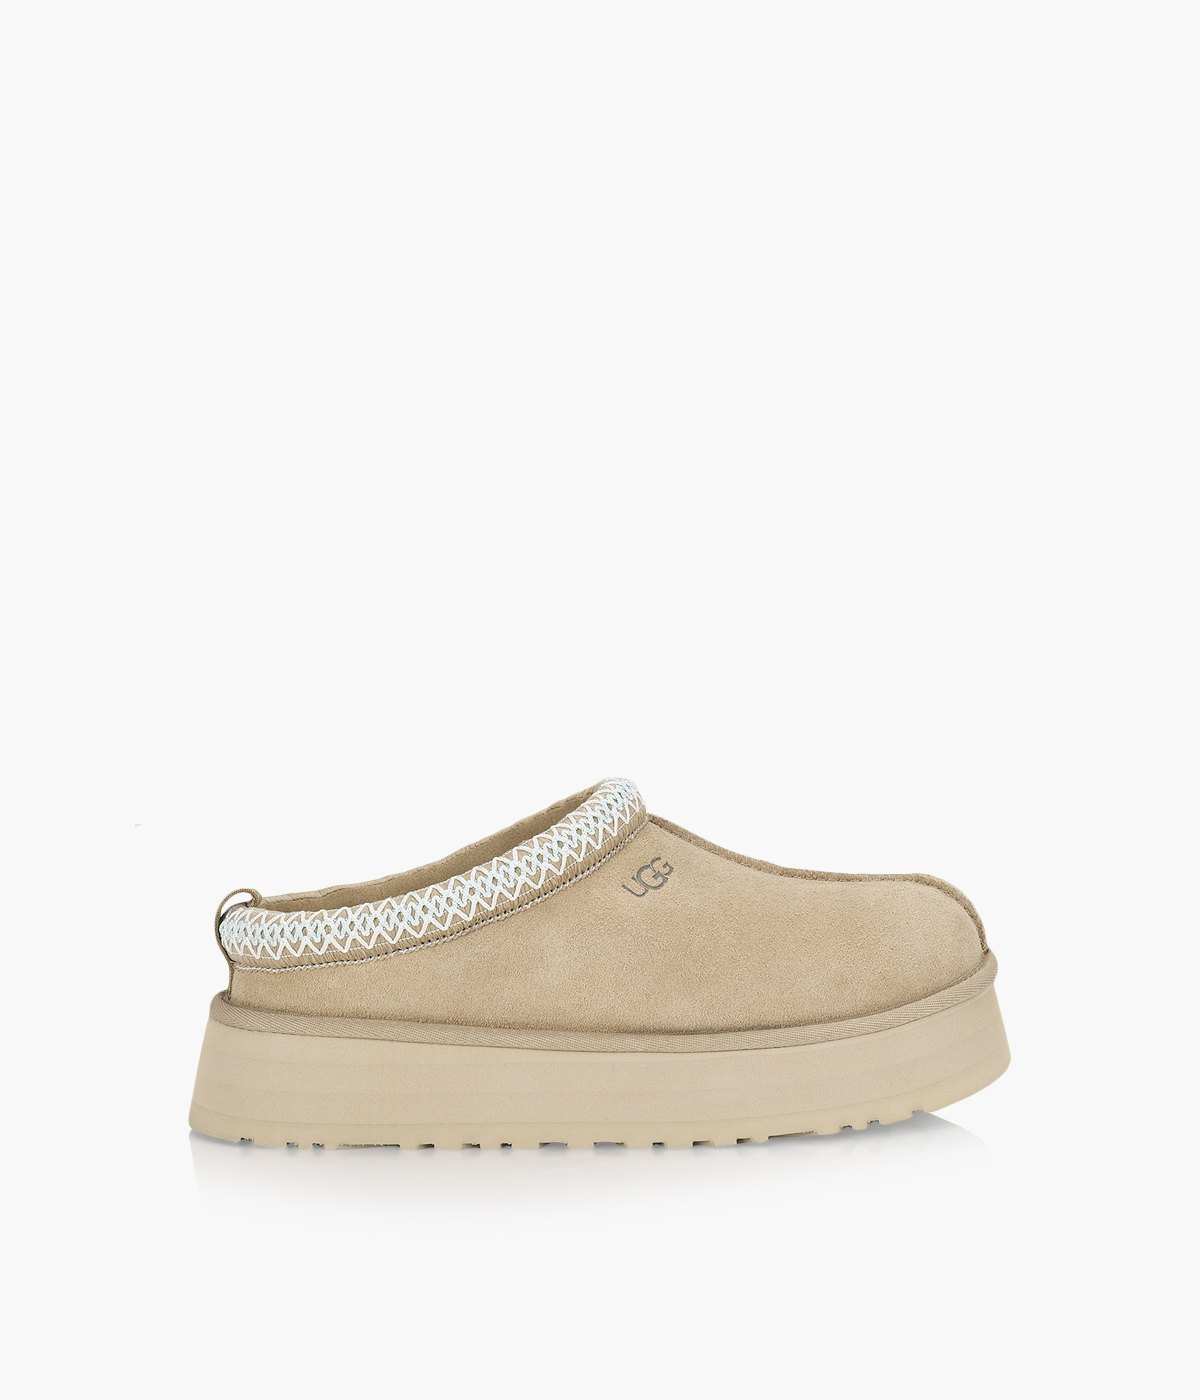 UGG TAZZ - Suede | BrownsShoes